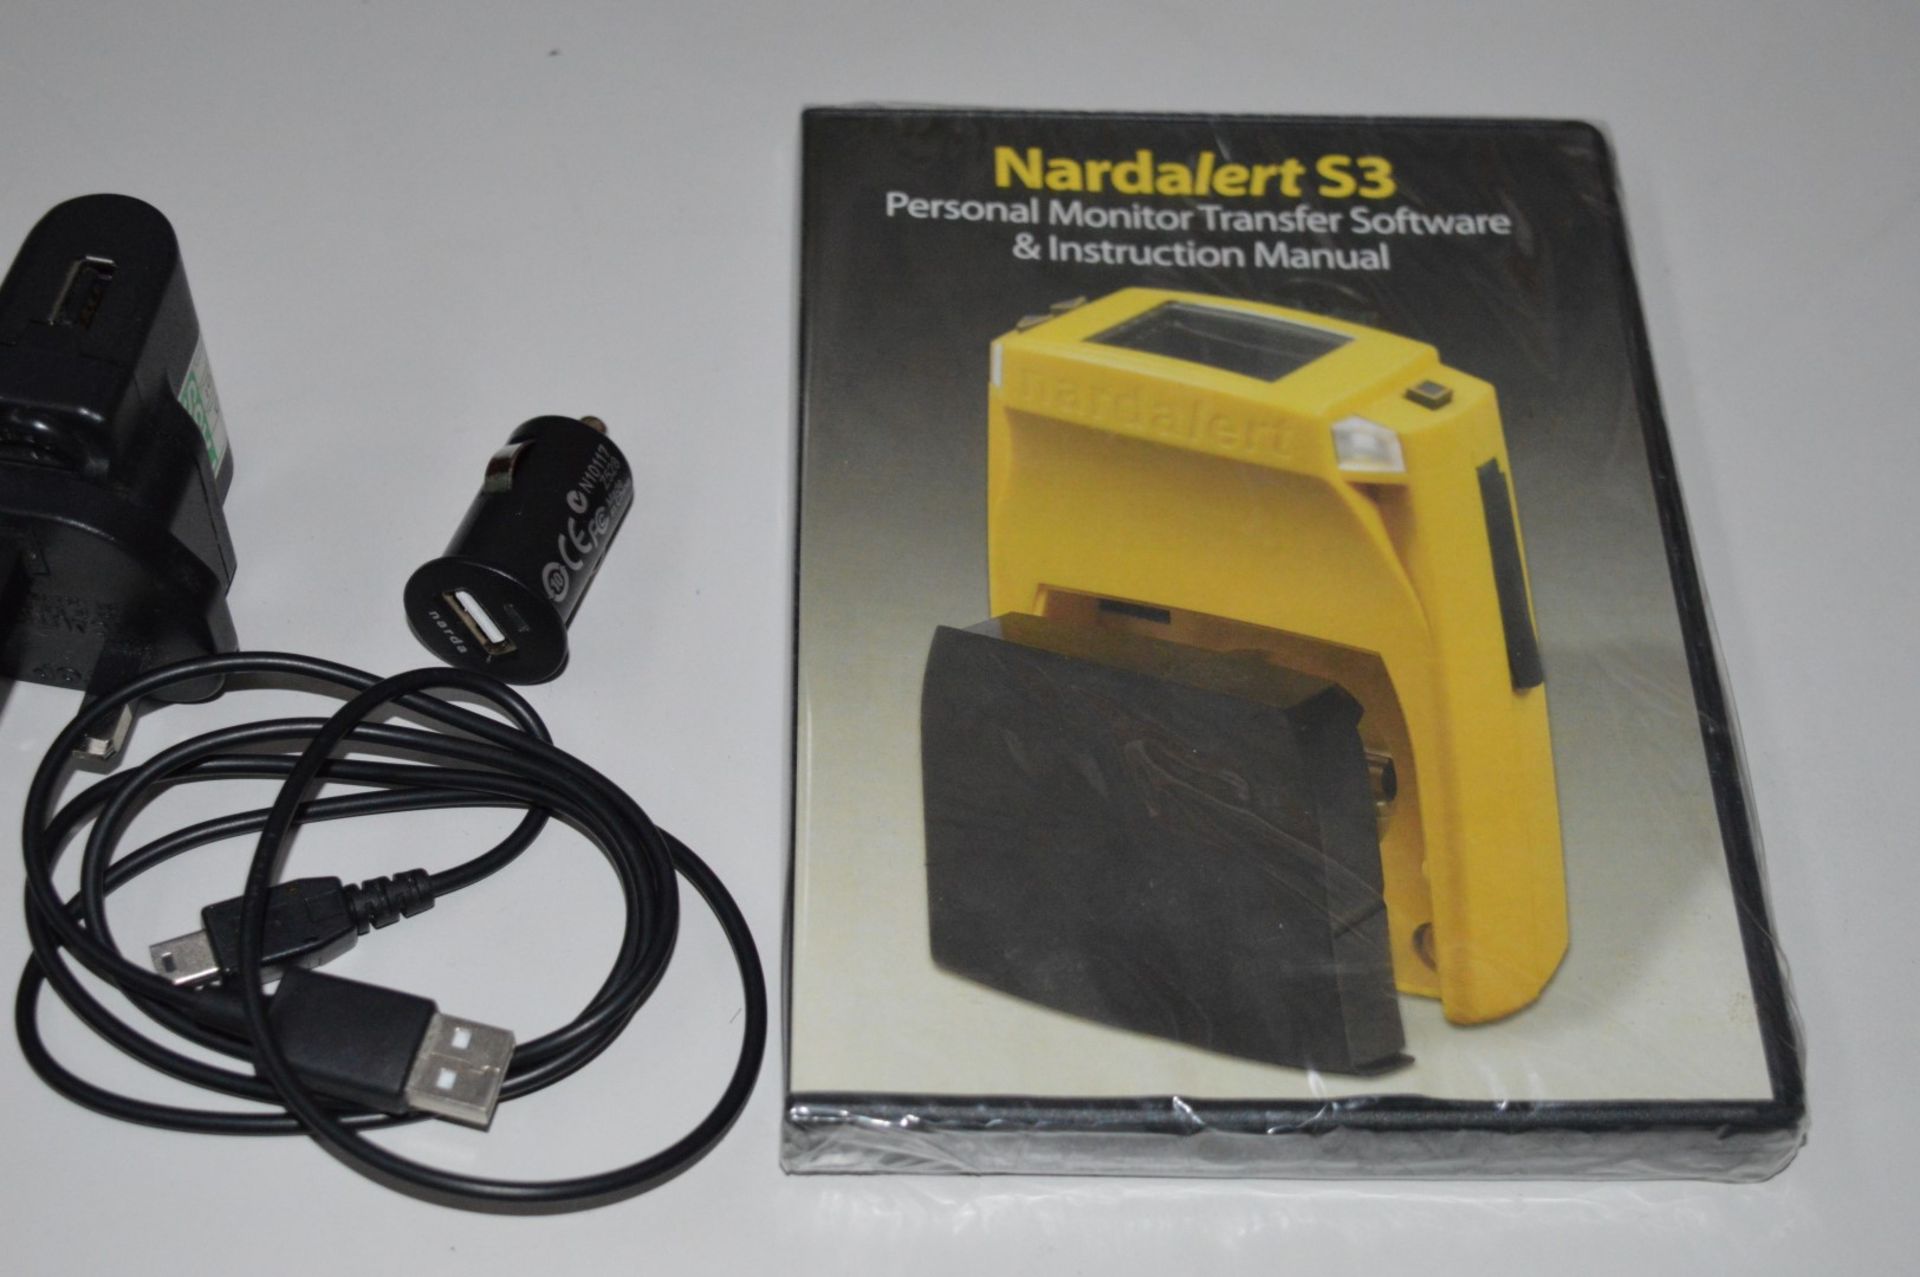 1 x Nardalert S3 None Ionizing Radiation Monitor - Model 2270/01 Mainframe - Includes Carry Case, - Image 6 of 13